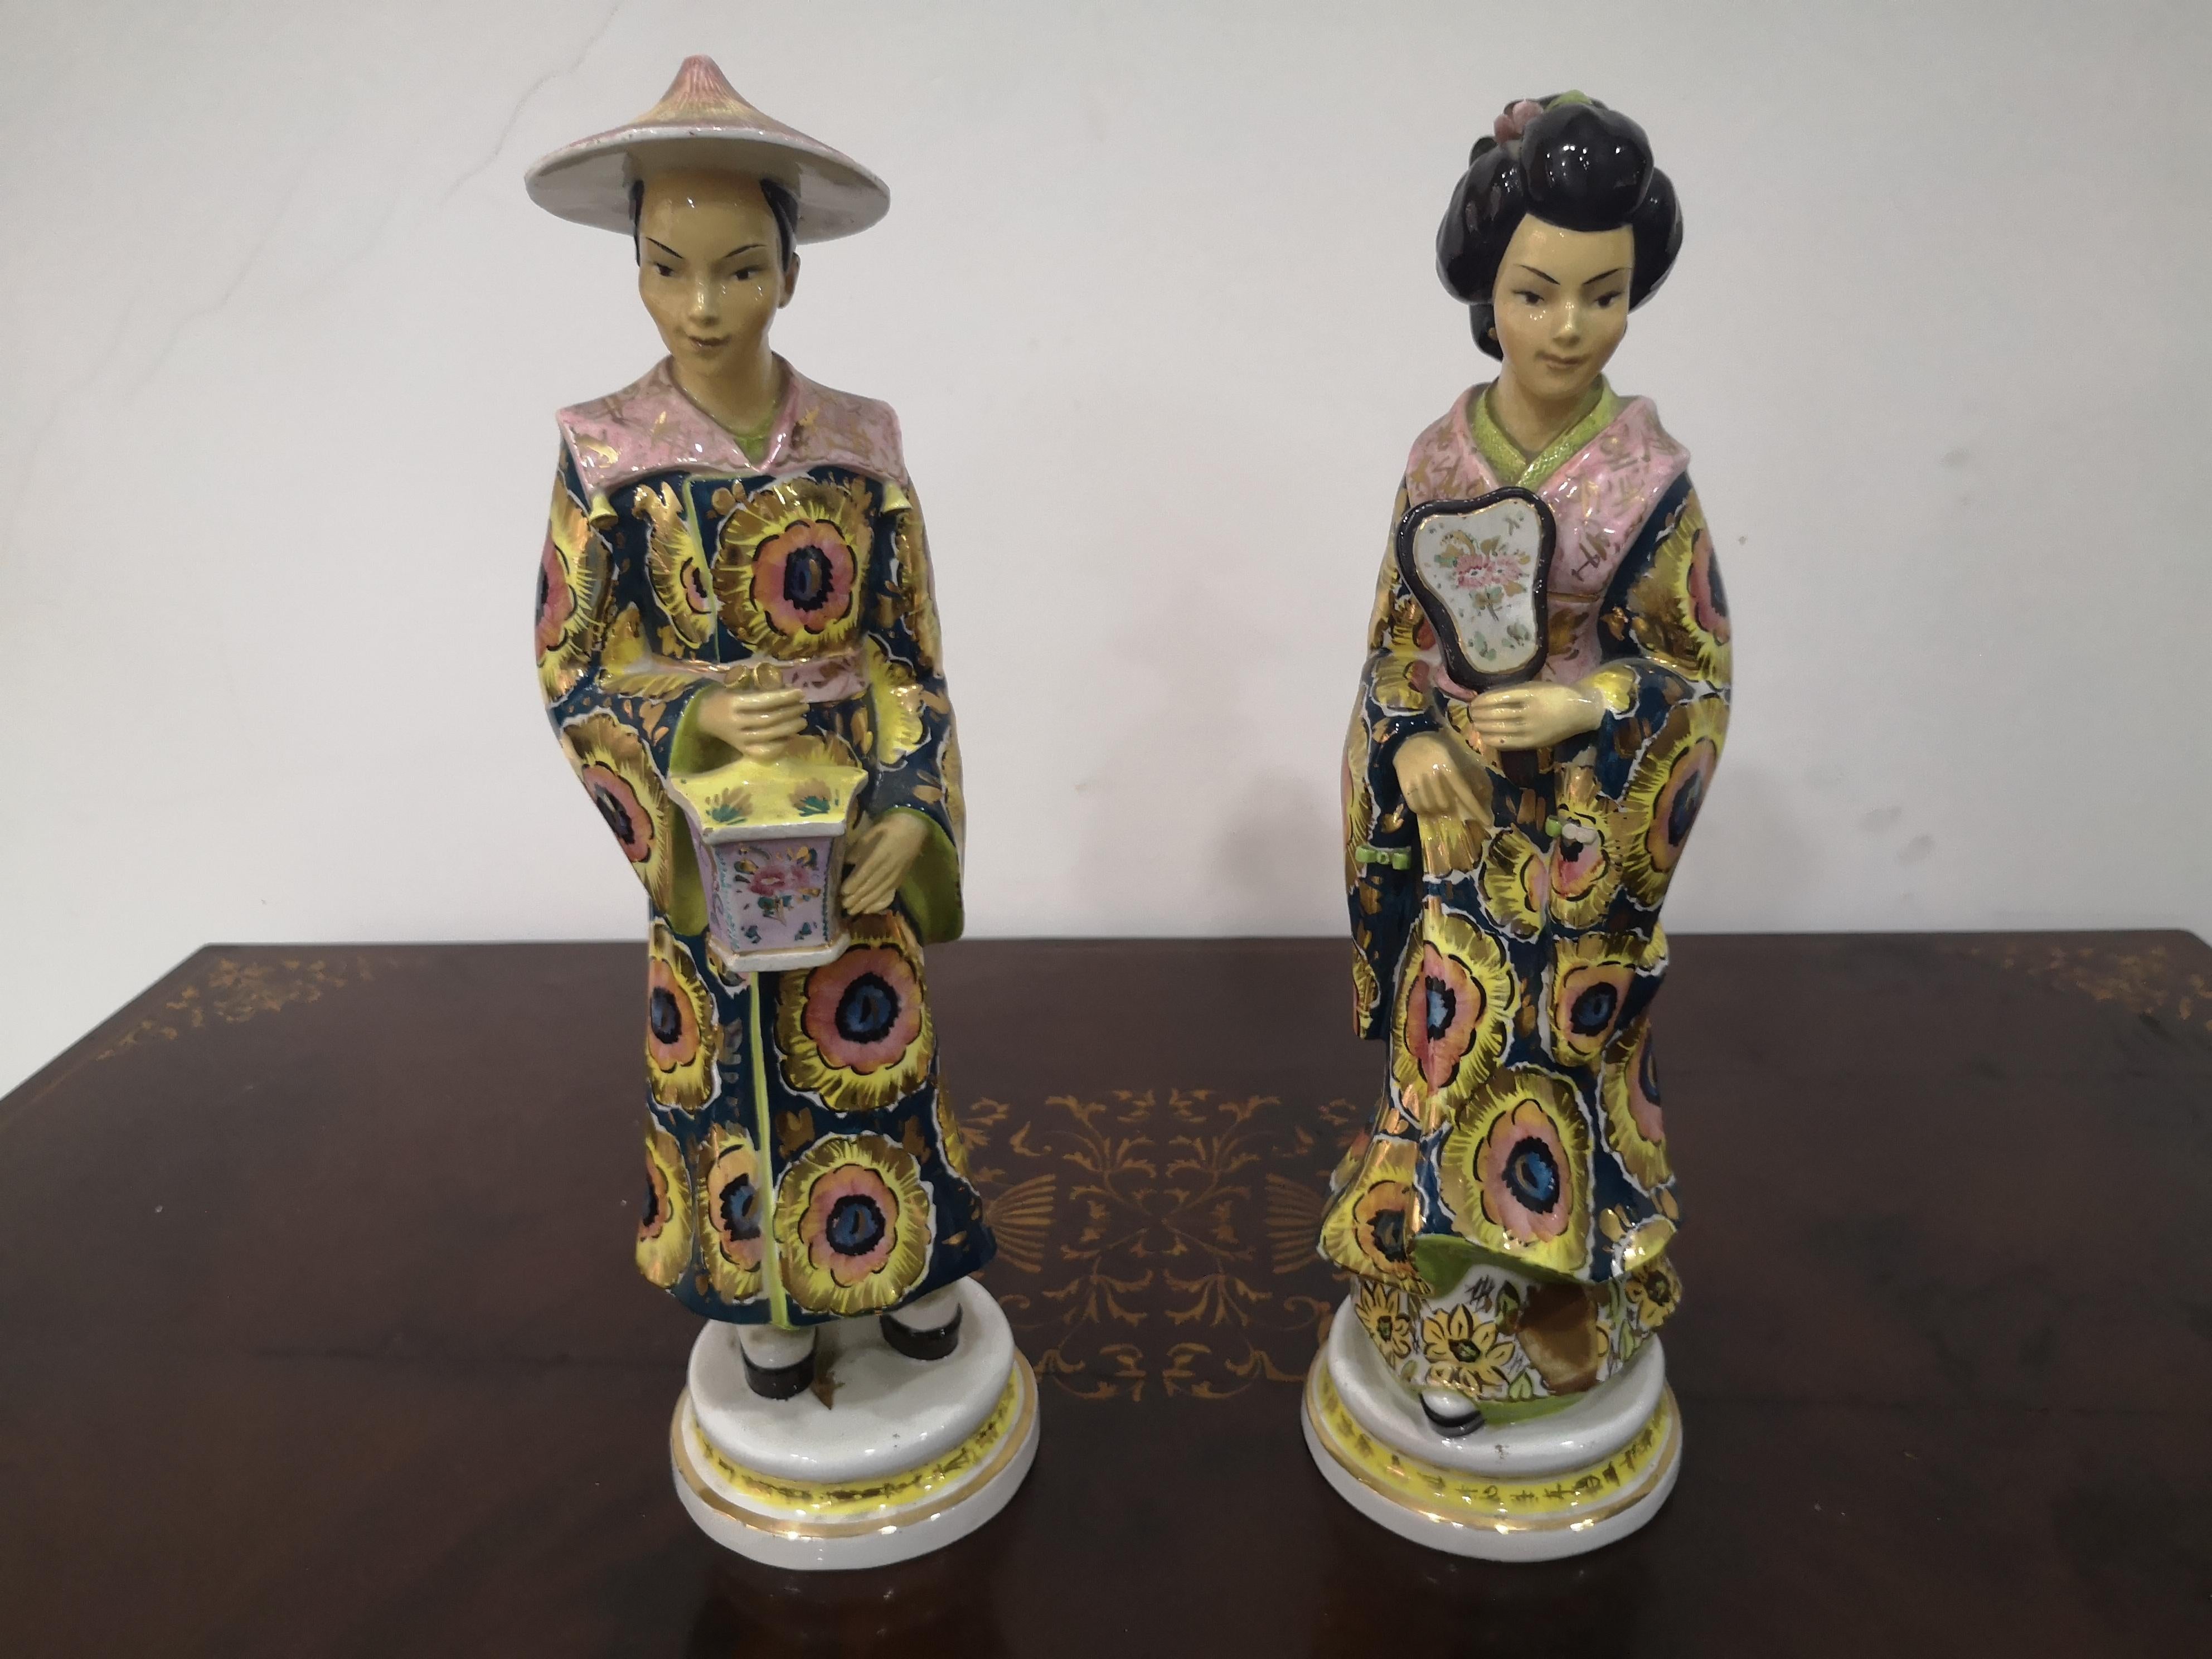 Pair of oriental porcelain figurines of excellent workmanship early 1900s
in very good condition with no imperfections.
The figurines measure:
Height cm 42/43
Width at the base 12 cm